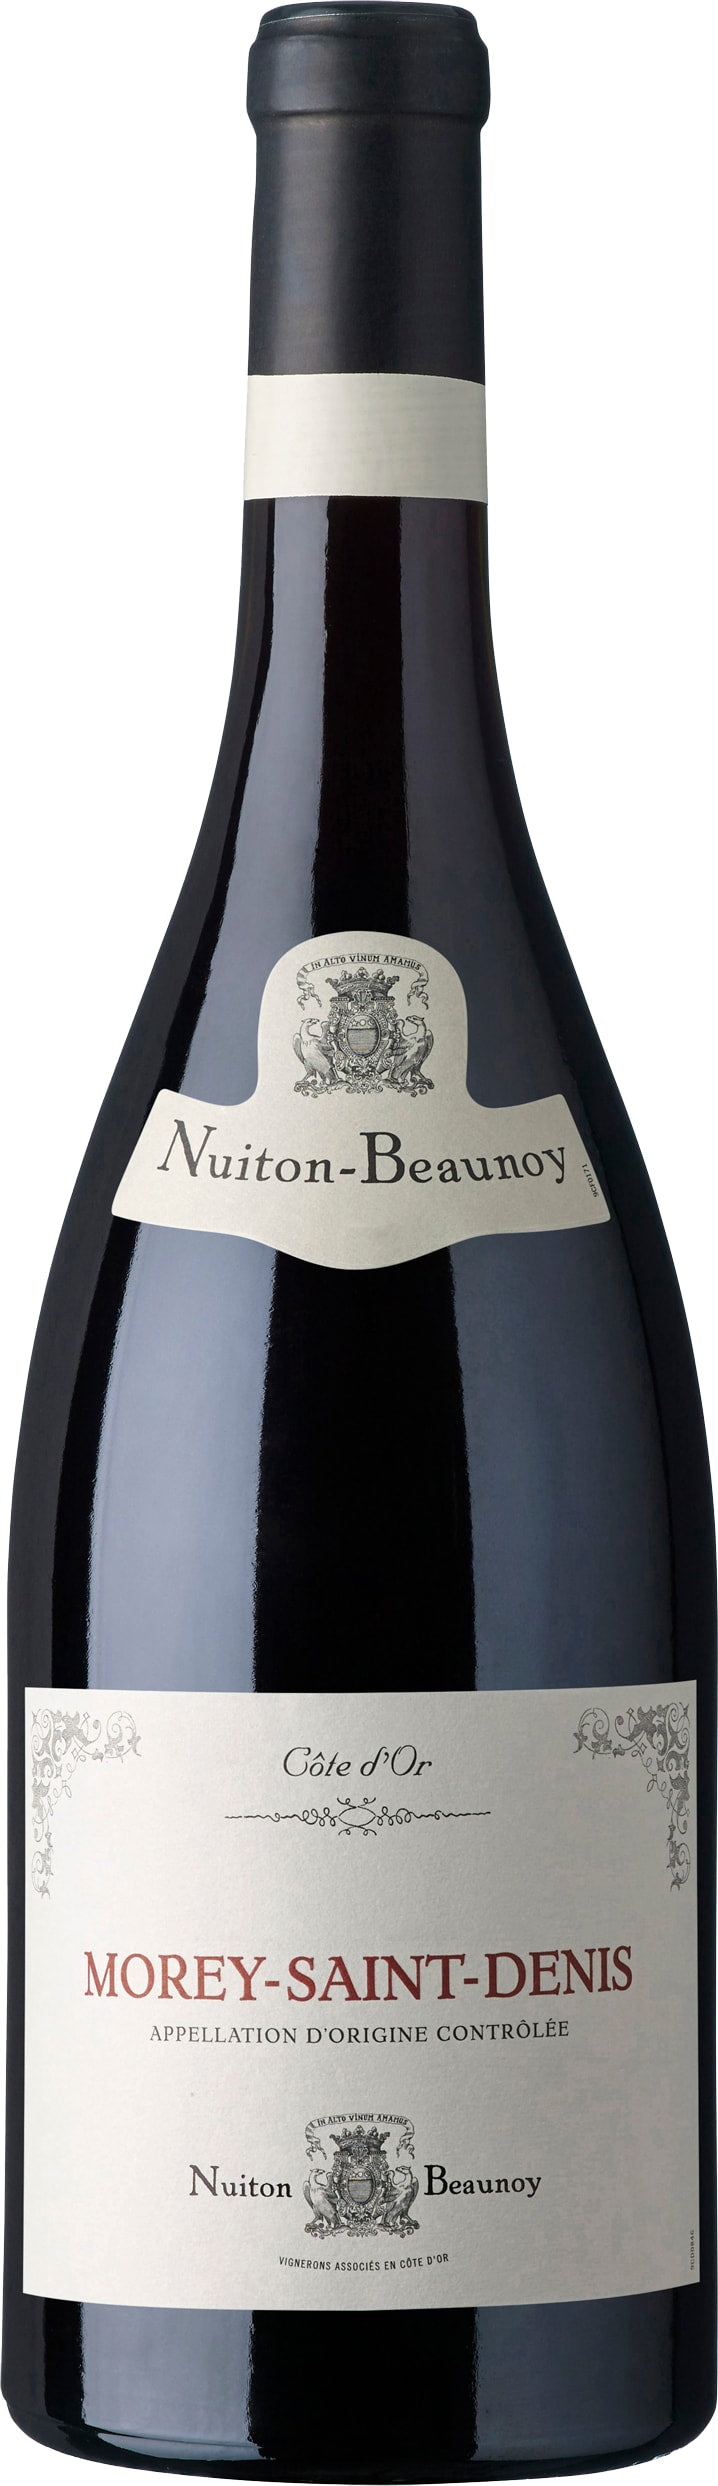 Nuiton-Beaunoy Morey-Saint-Denis 2018 75cl - Buy Nuiton-Beaunoy Wines from GREAT WINES DIRECT wine shop